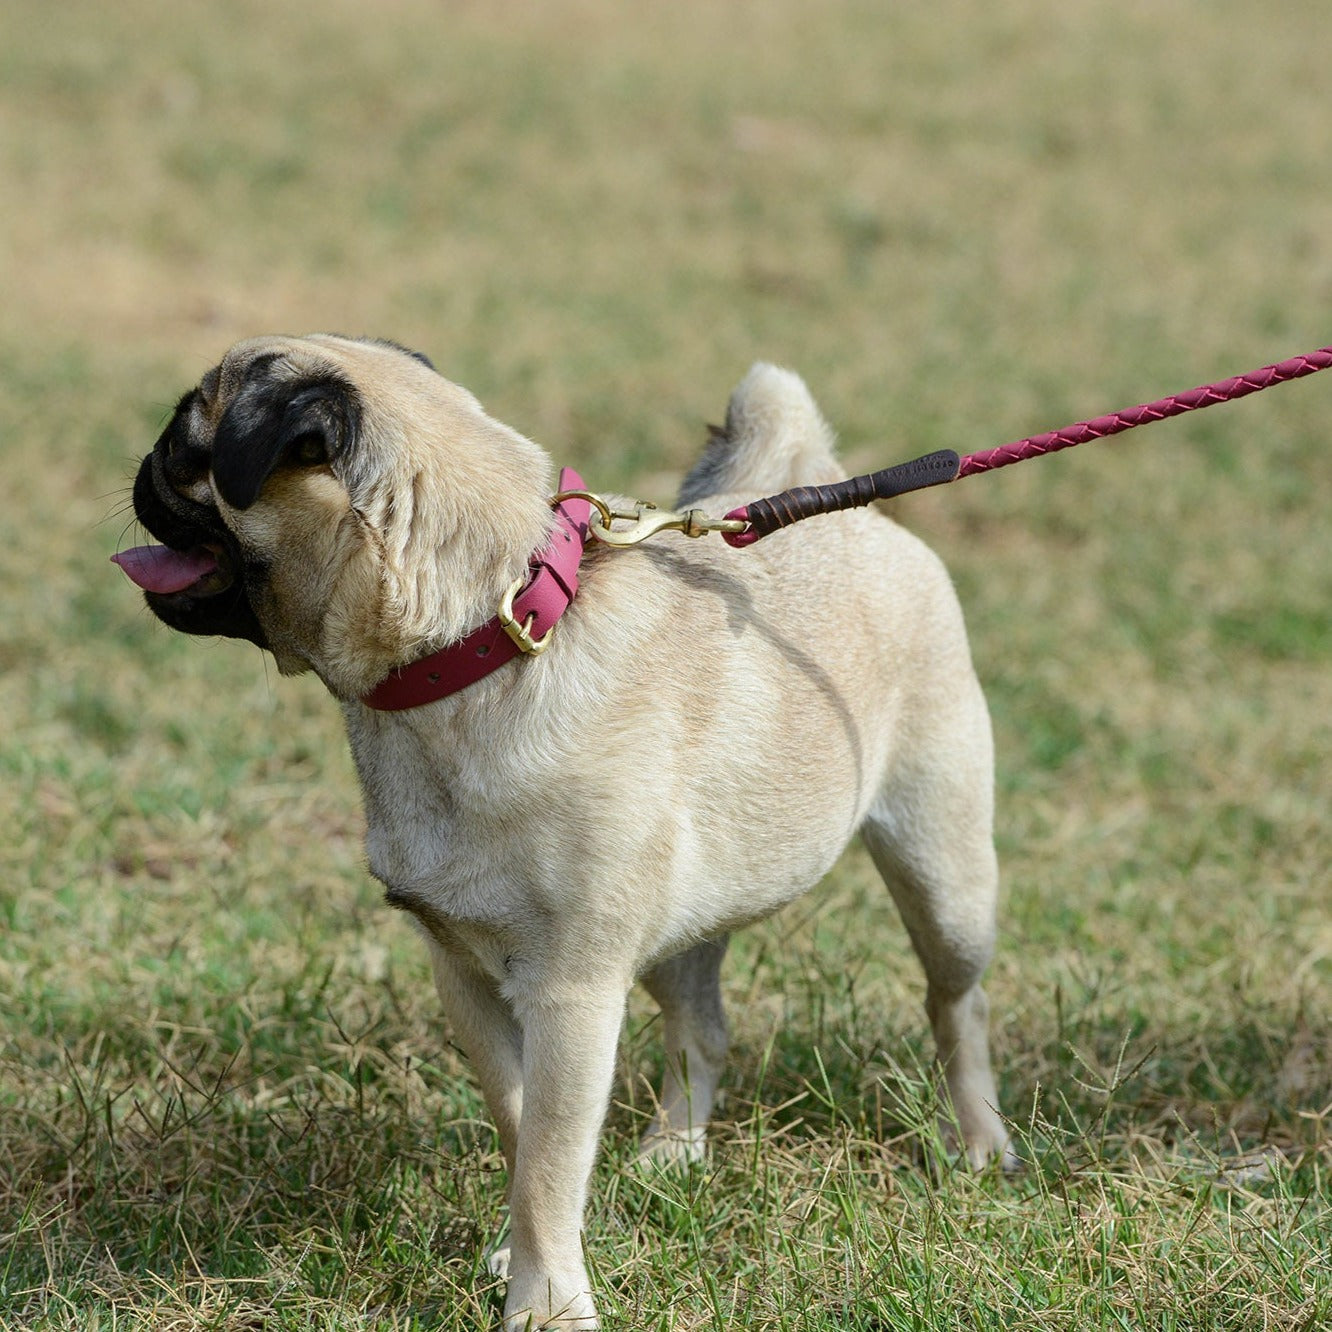 A pug on a Georgie Paws Windsor Lead - ruby playfully sticks out its tongue while standing on a grassy field, its head turned to the side, showcasing its curled tail and a keen interest in the surroundings